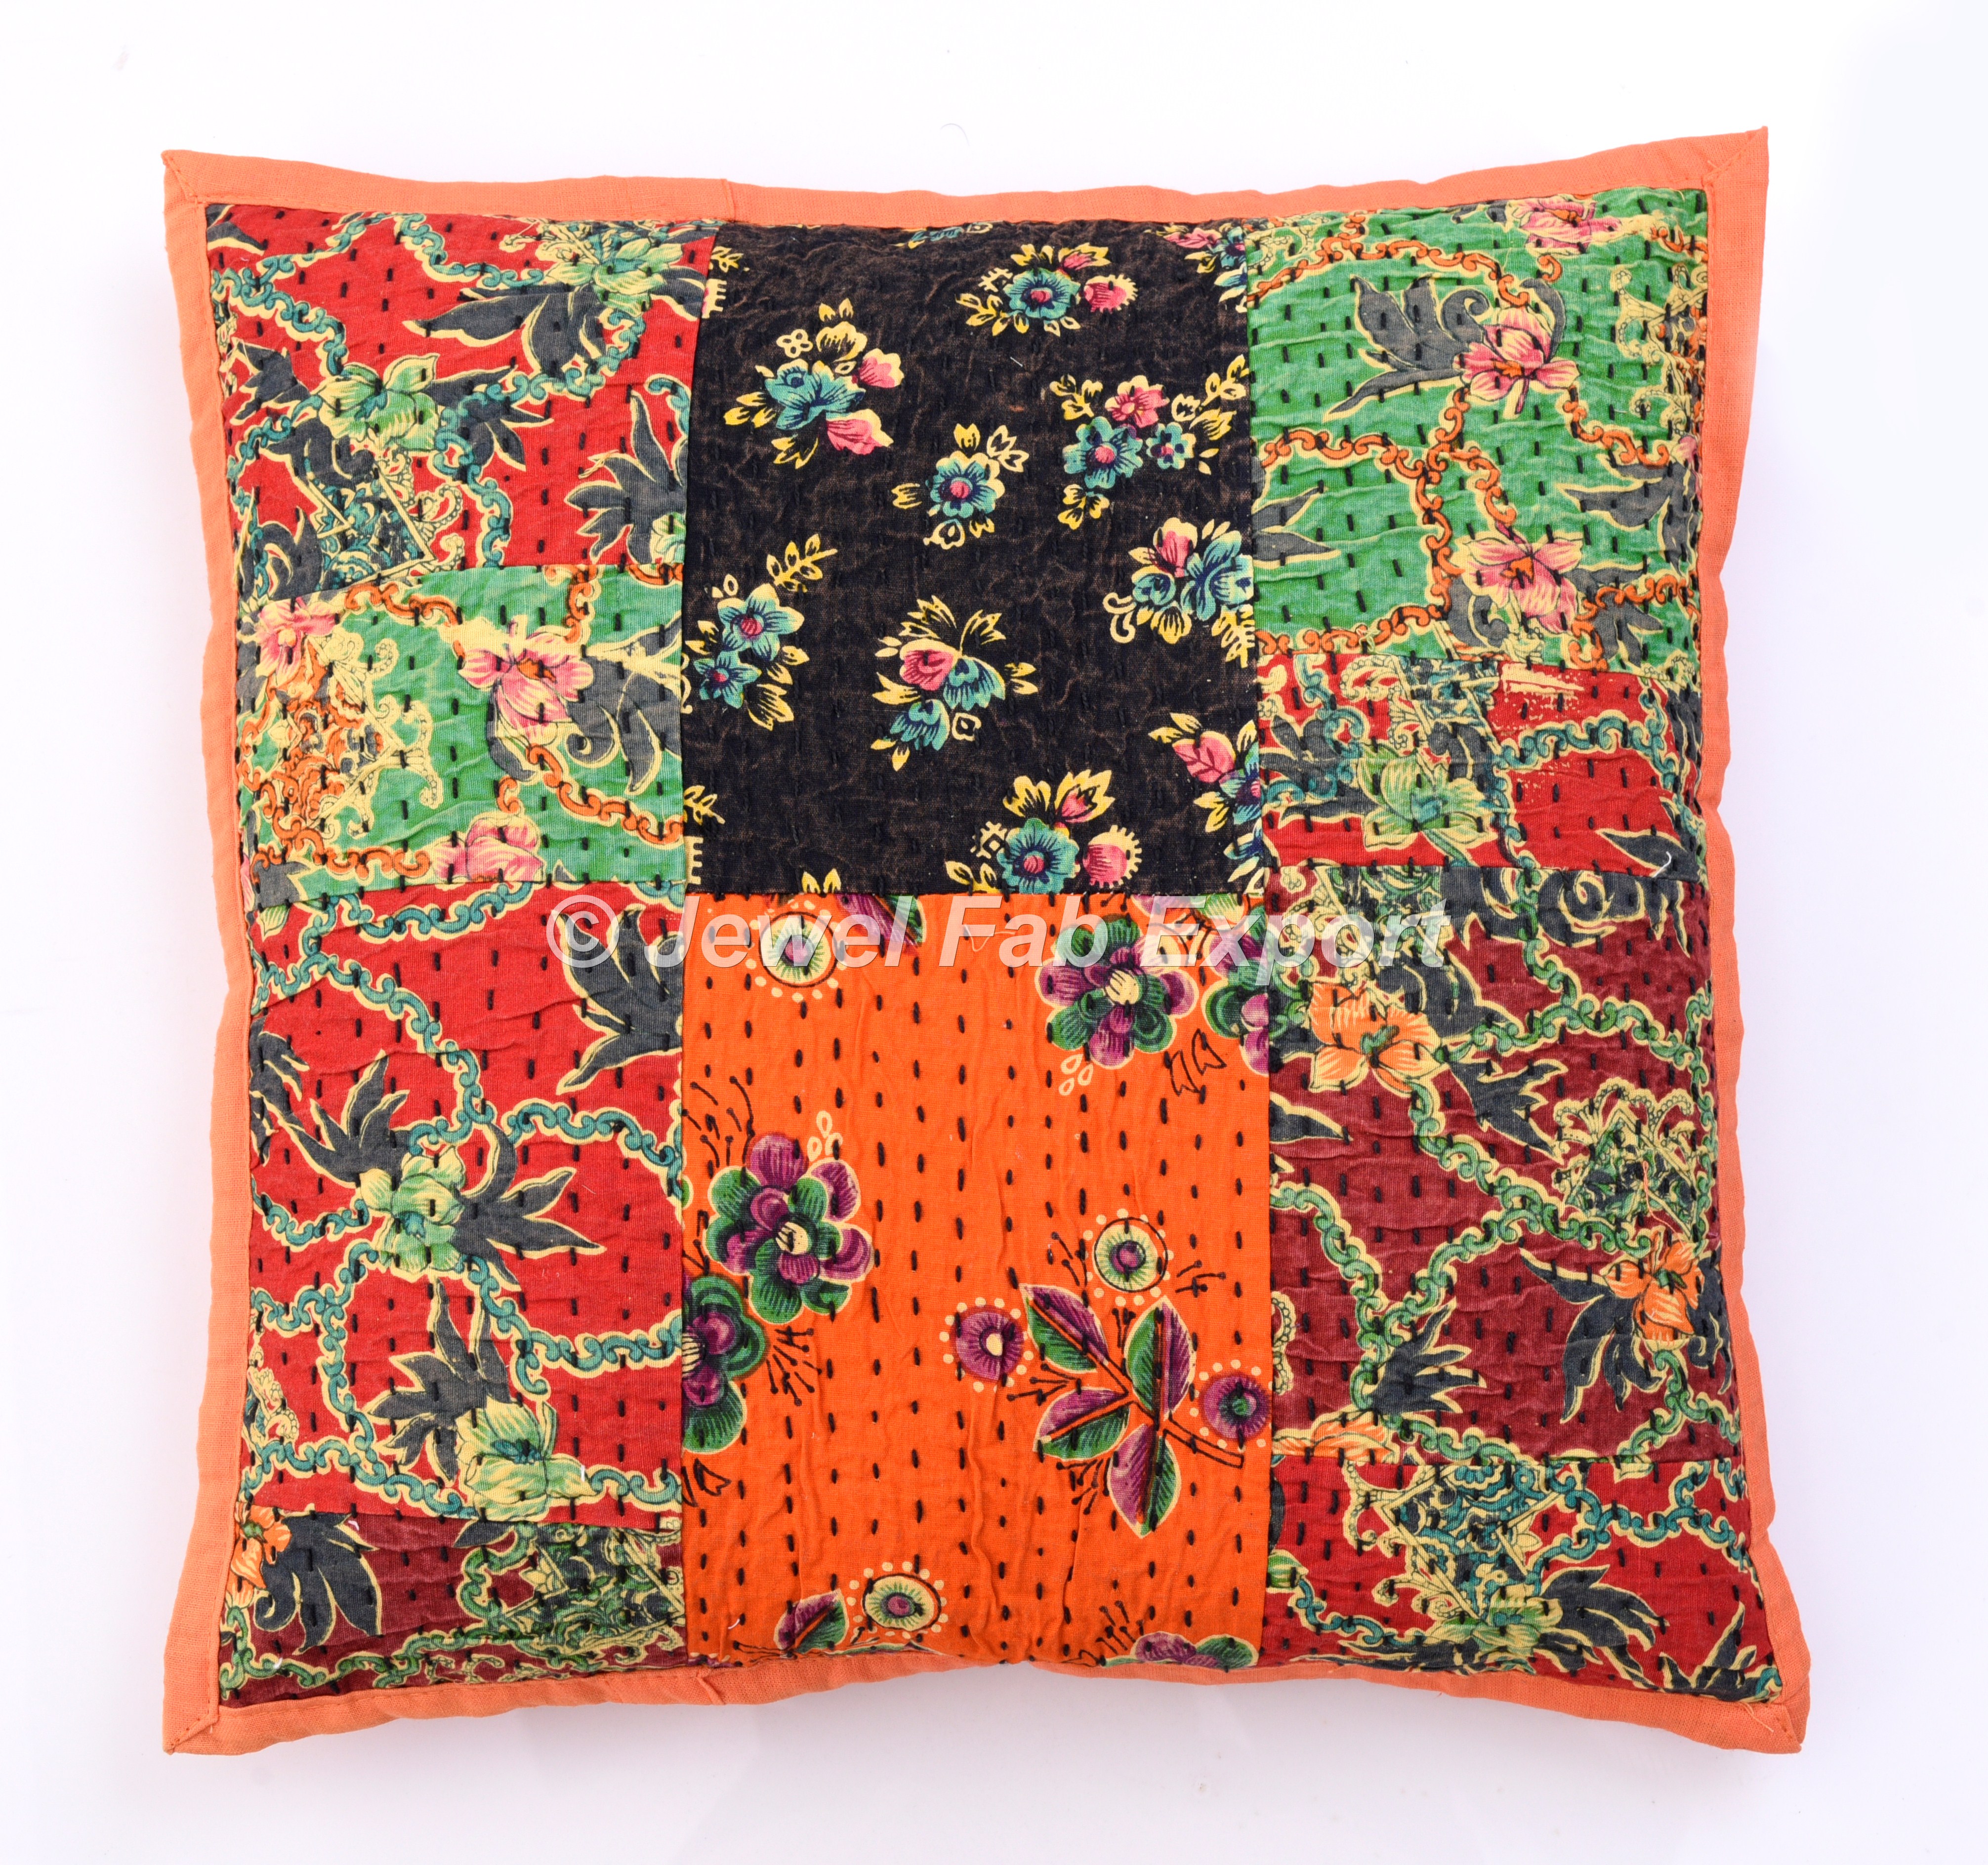 Details about   Wholesale Lot 50 Pc Indian Kantha-Work Cushion Cover Handmade Room Pillow-Cover 